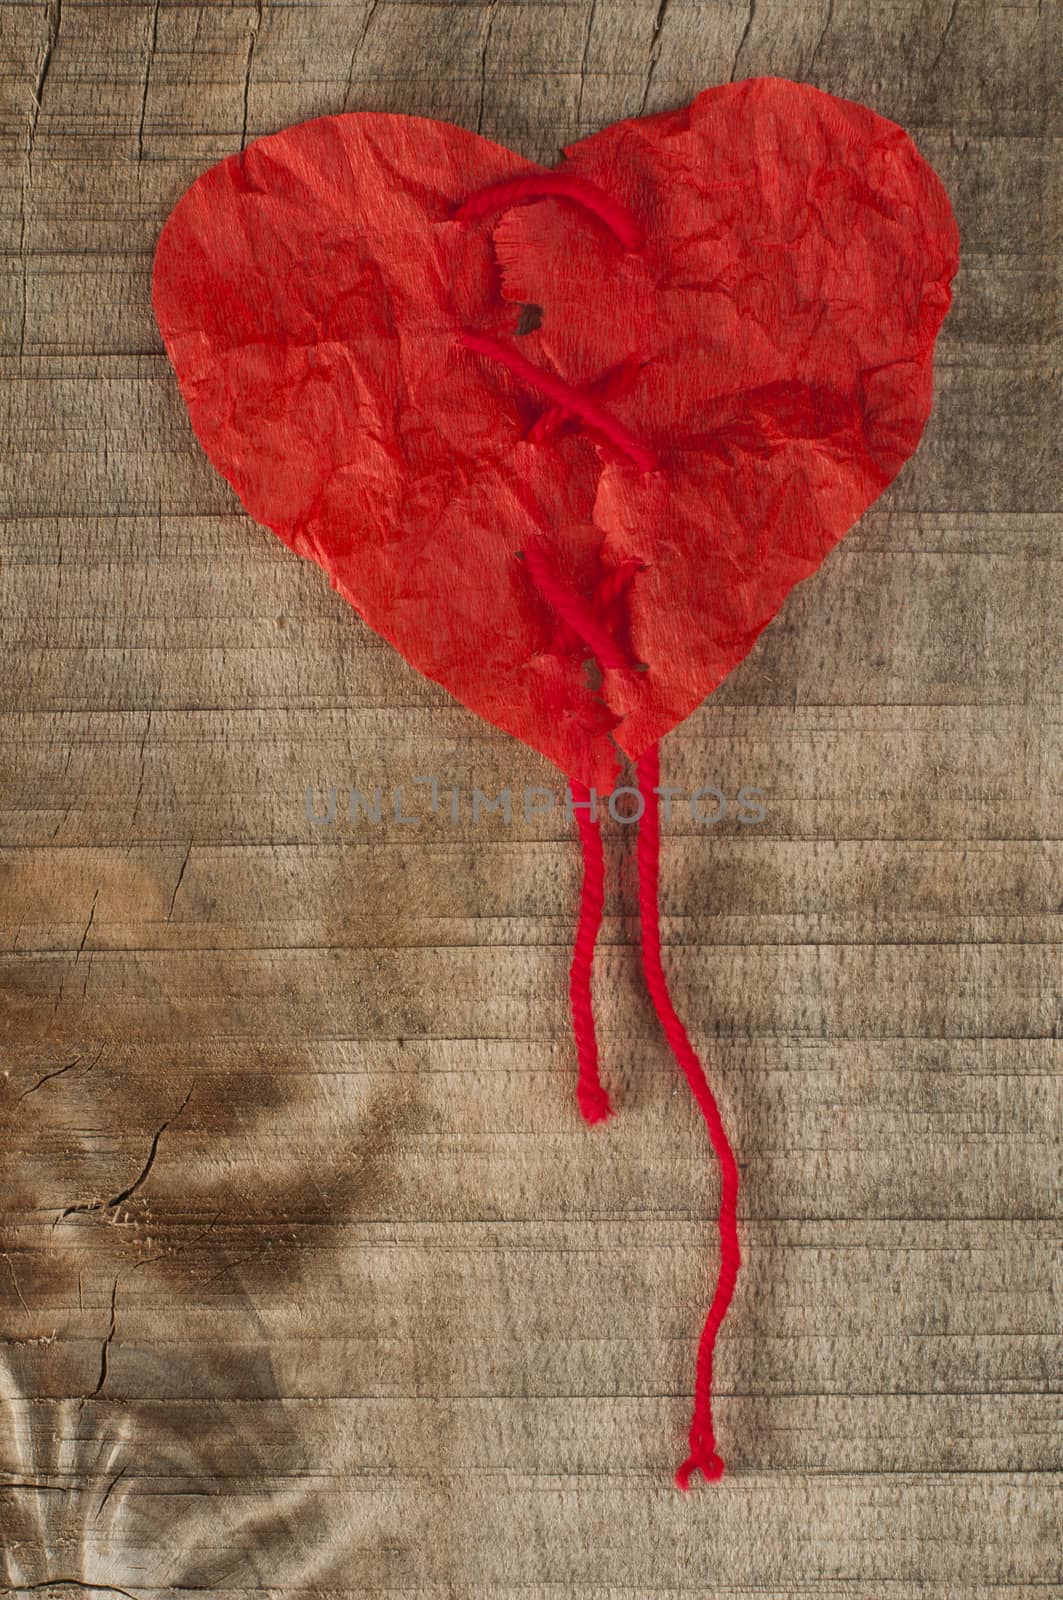 Heart made ​​of curled red paper by deyan_georgiev